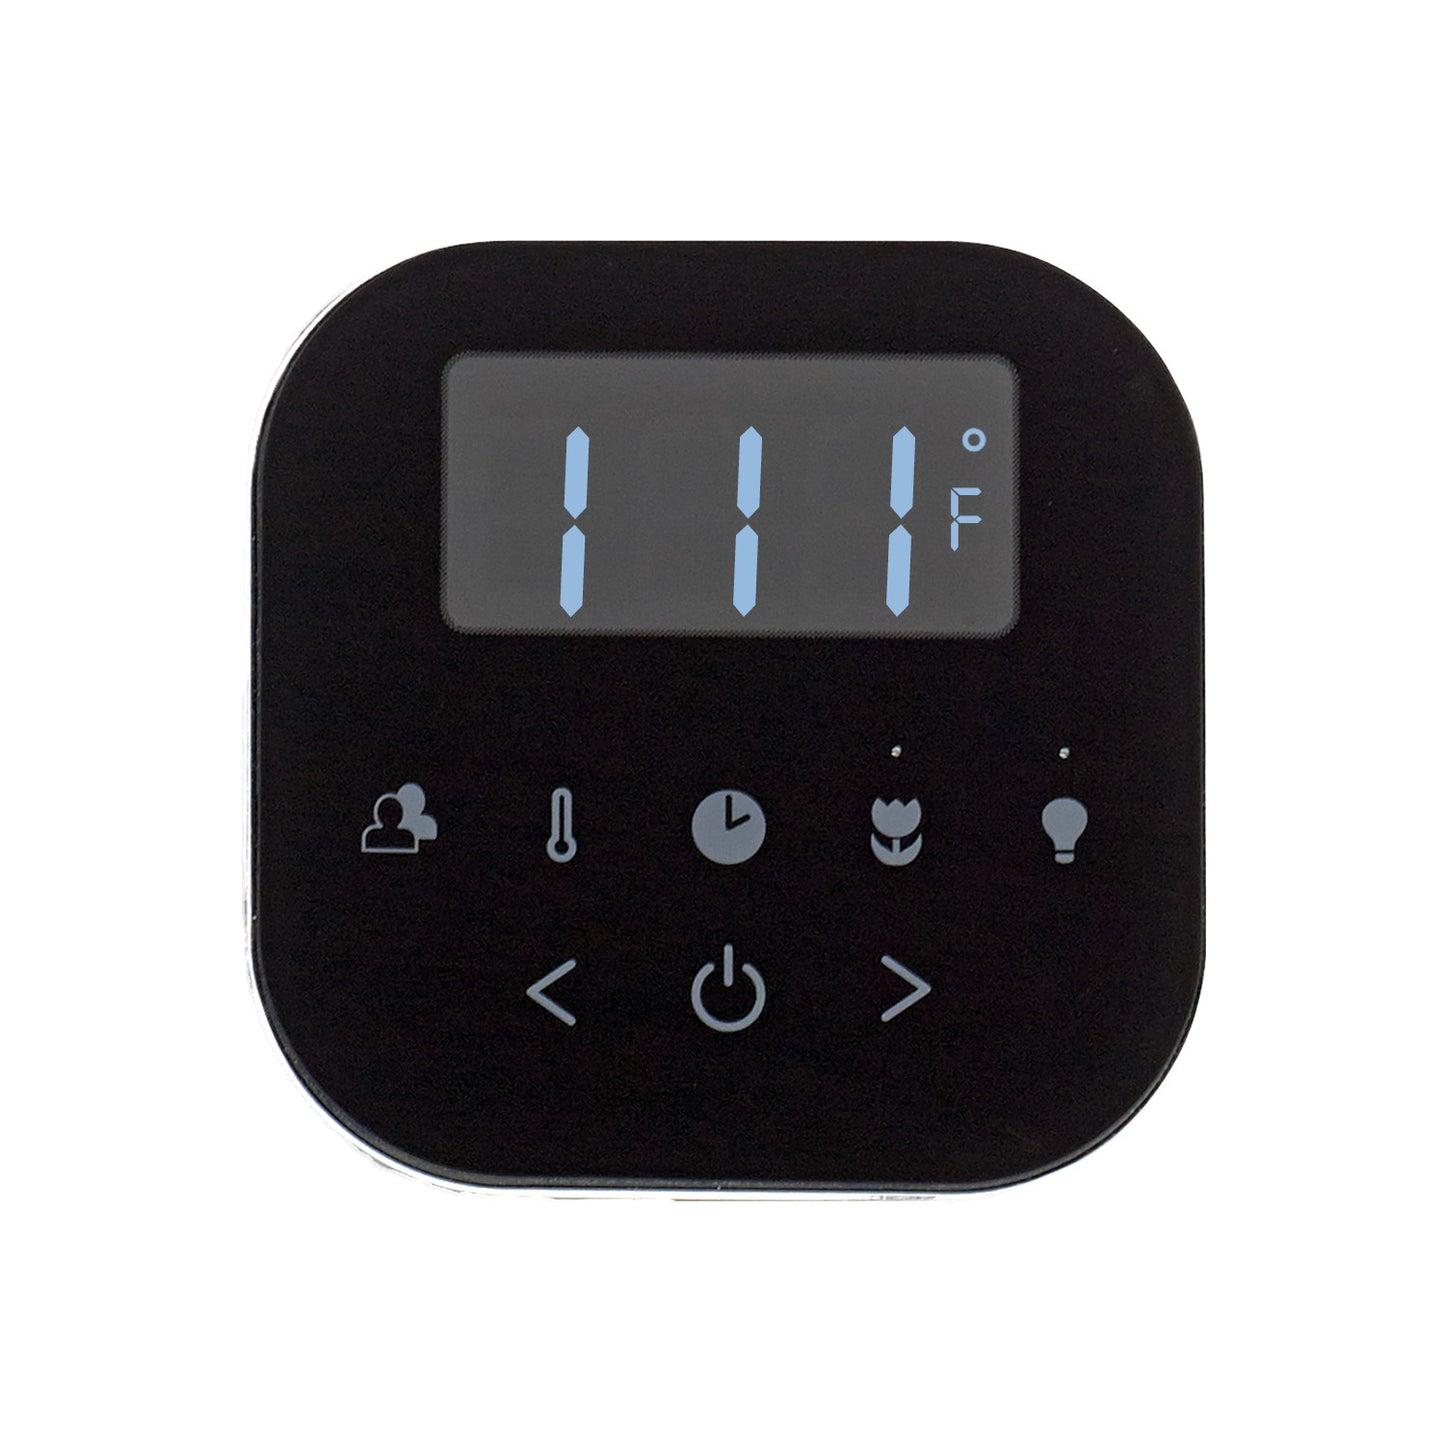 AirTempo Steam Shower Control in Black with Polished Nickel